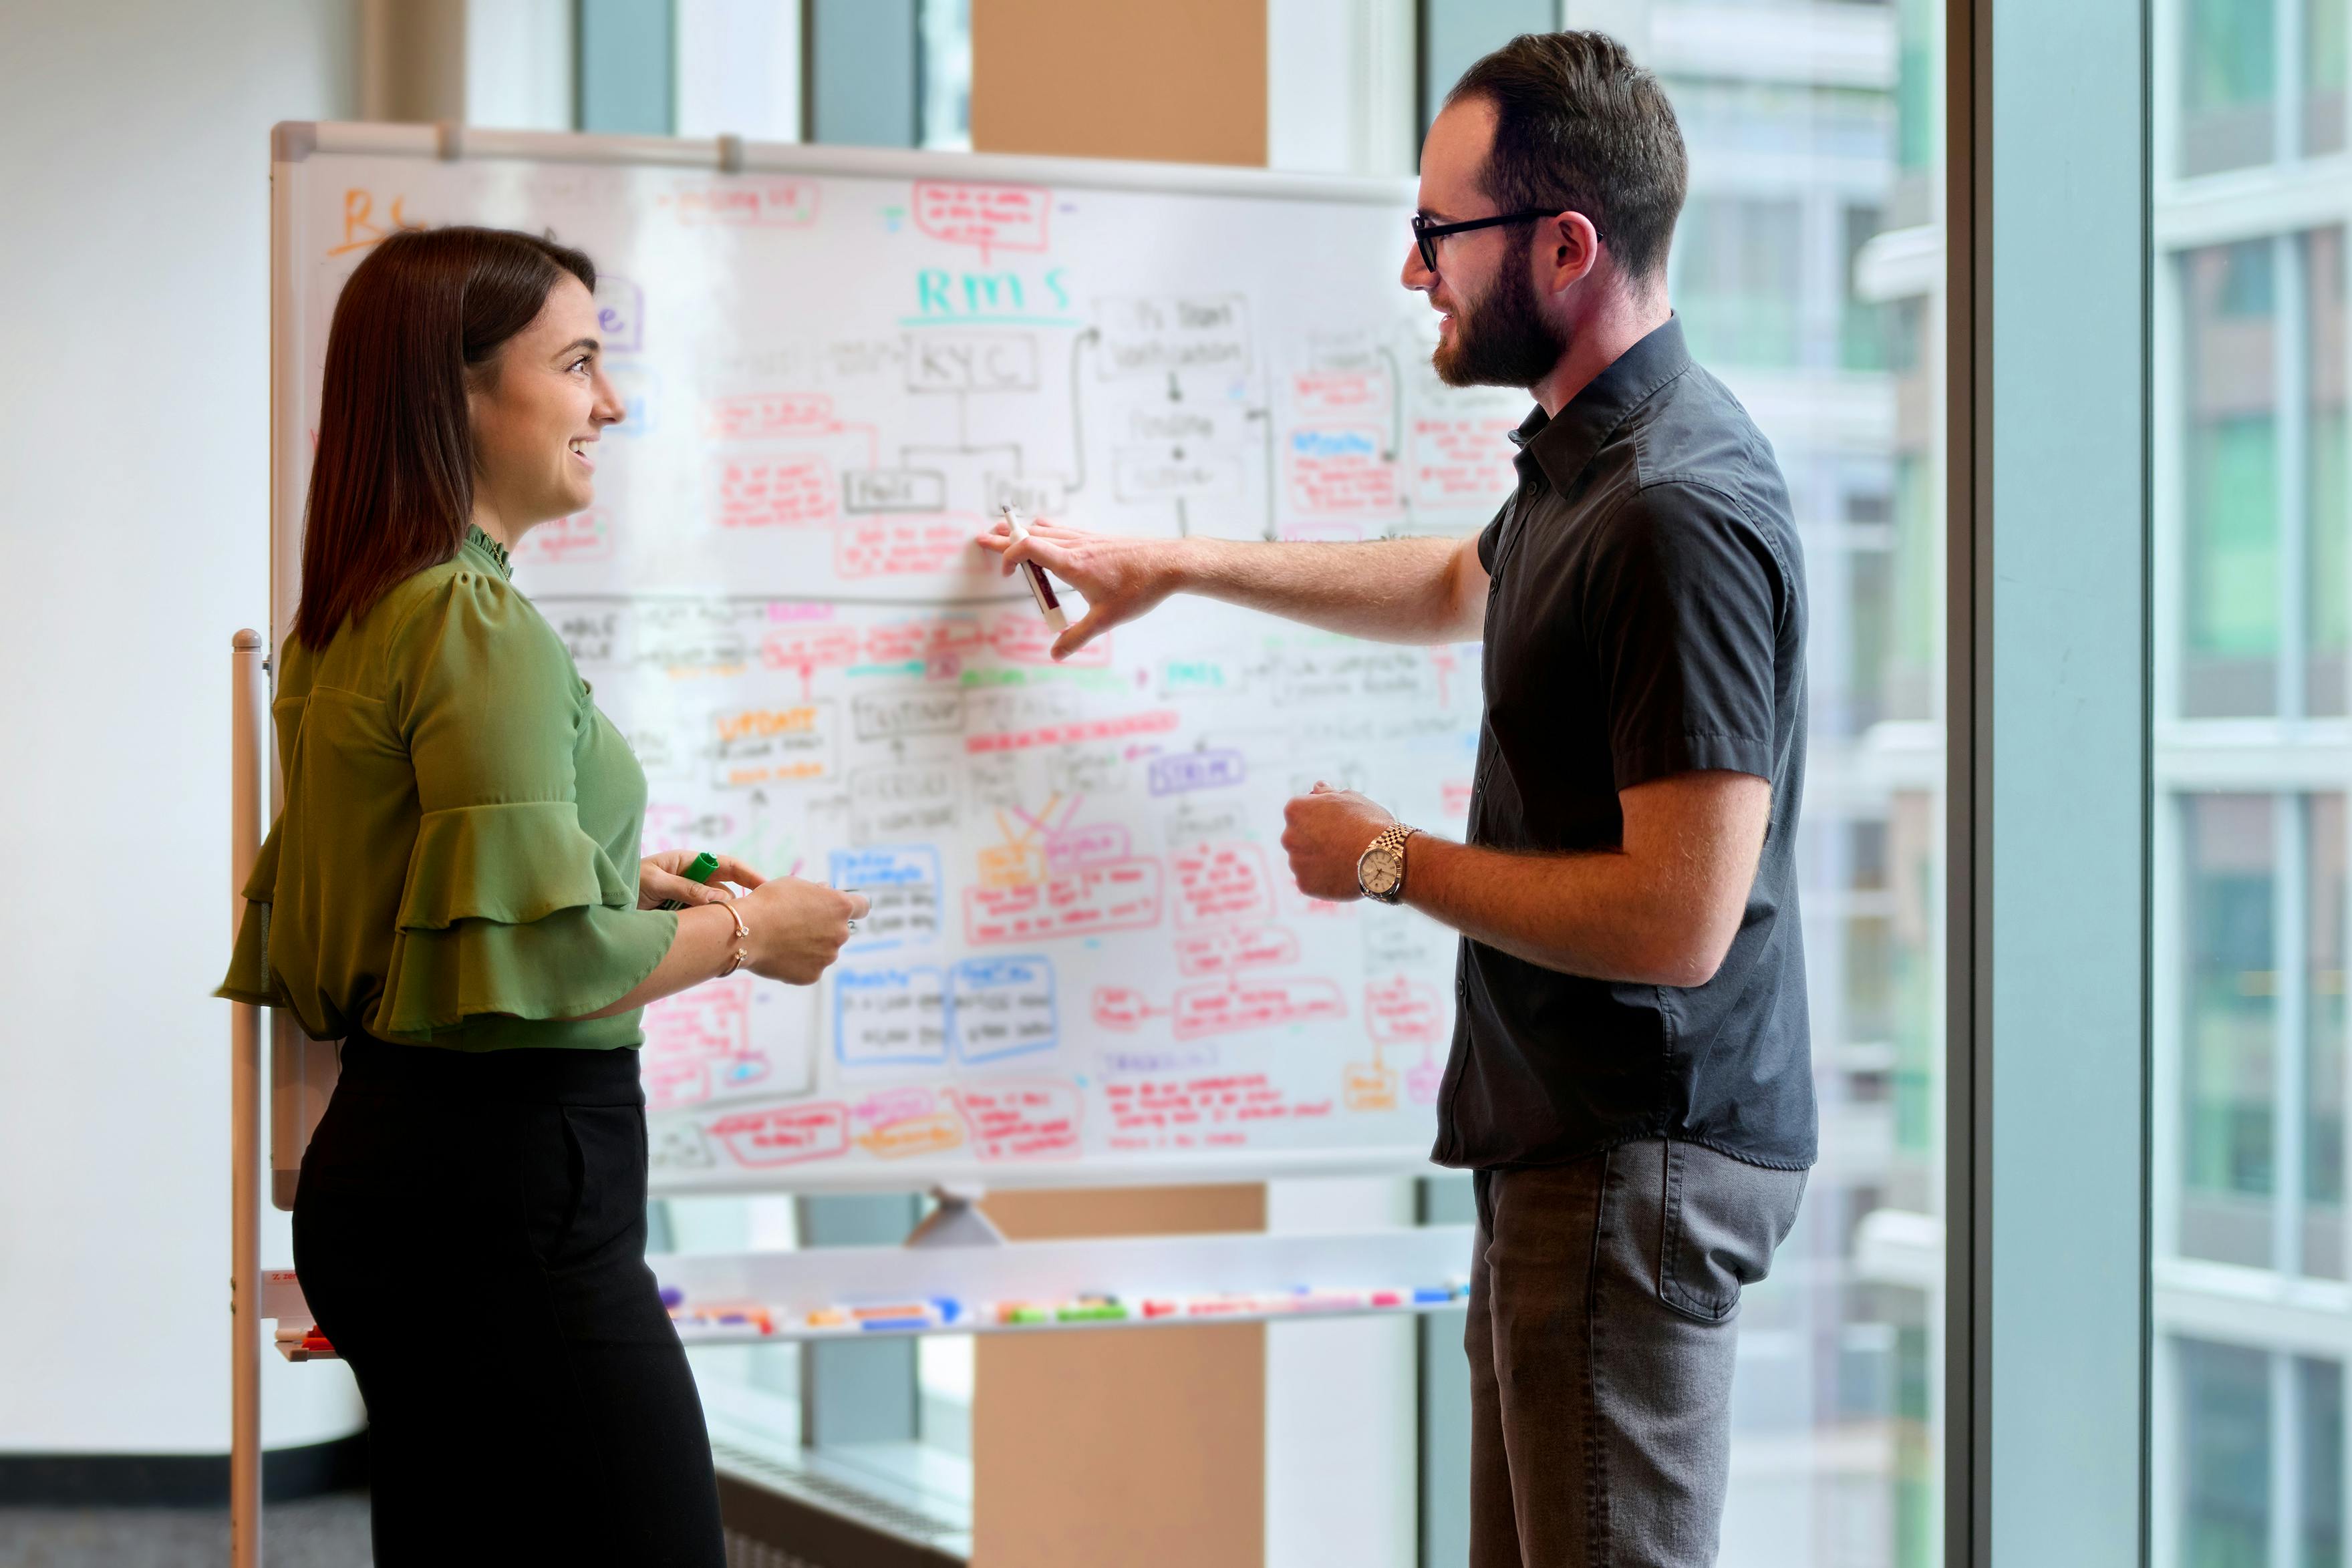 Two employees standing at a whiteboard in a conference room